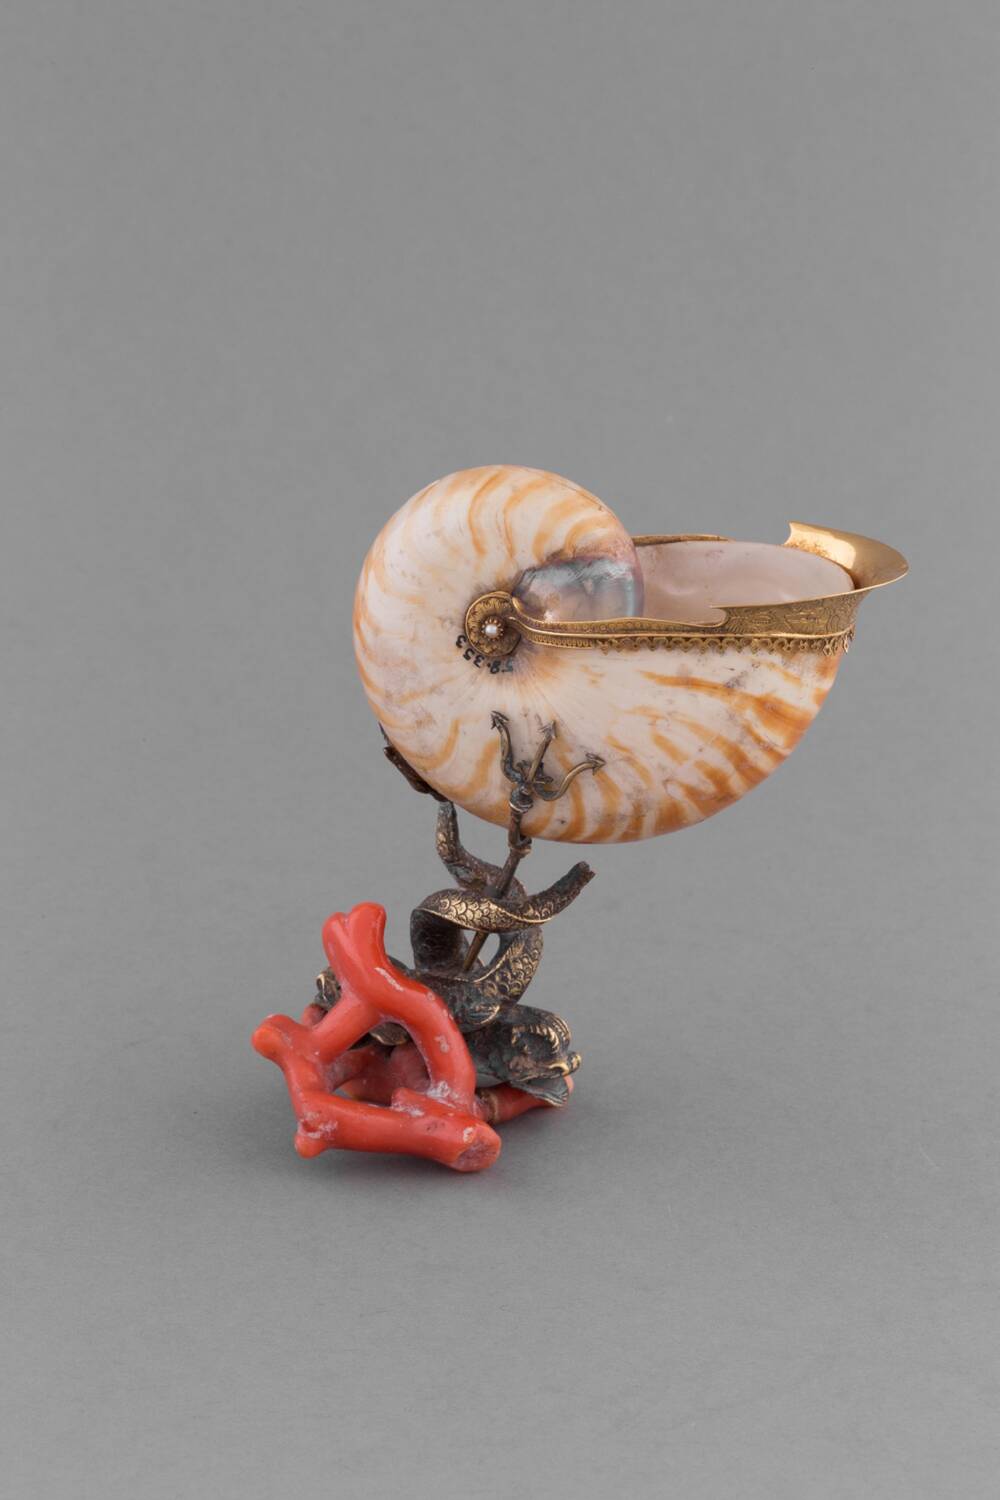 A type of cup made from shells and silver is displayed against a plain grey background. The main body of the cup is made from a large brown and white shell, where the lip has been coated in gold. It is supported by a silver stand, shaped like dolphins and tridents. The base appears to be made of coral.